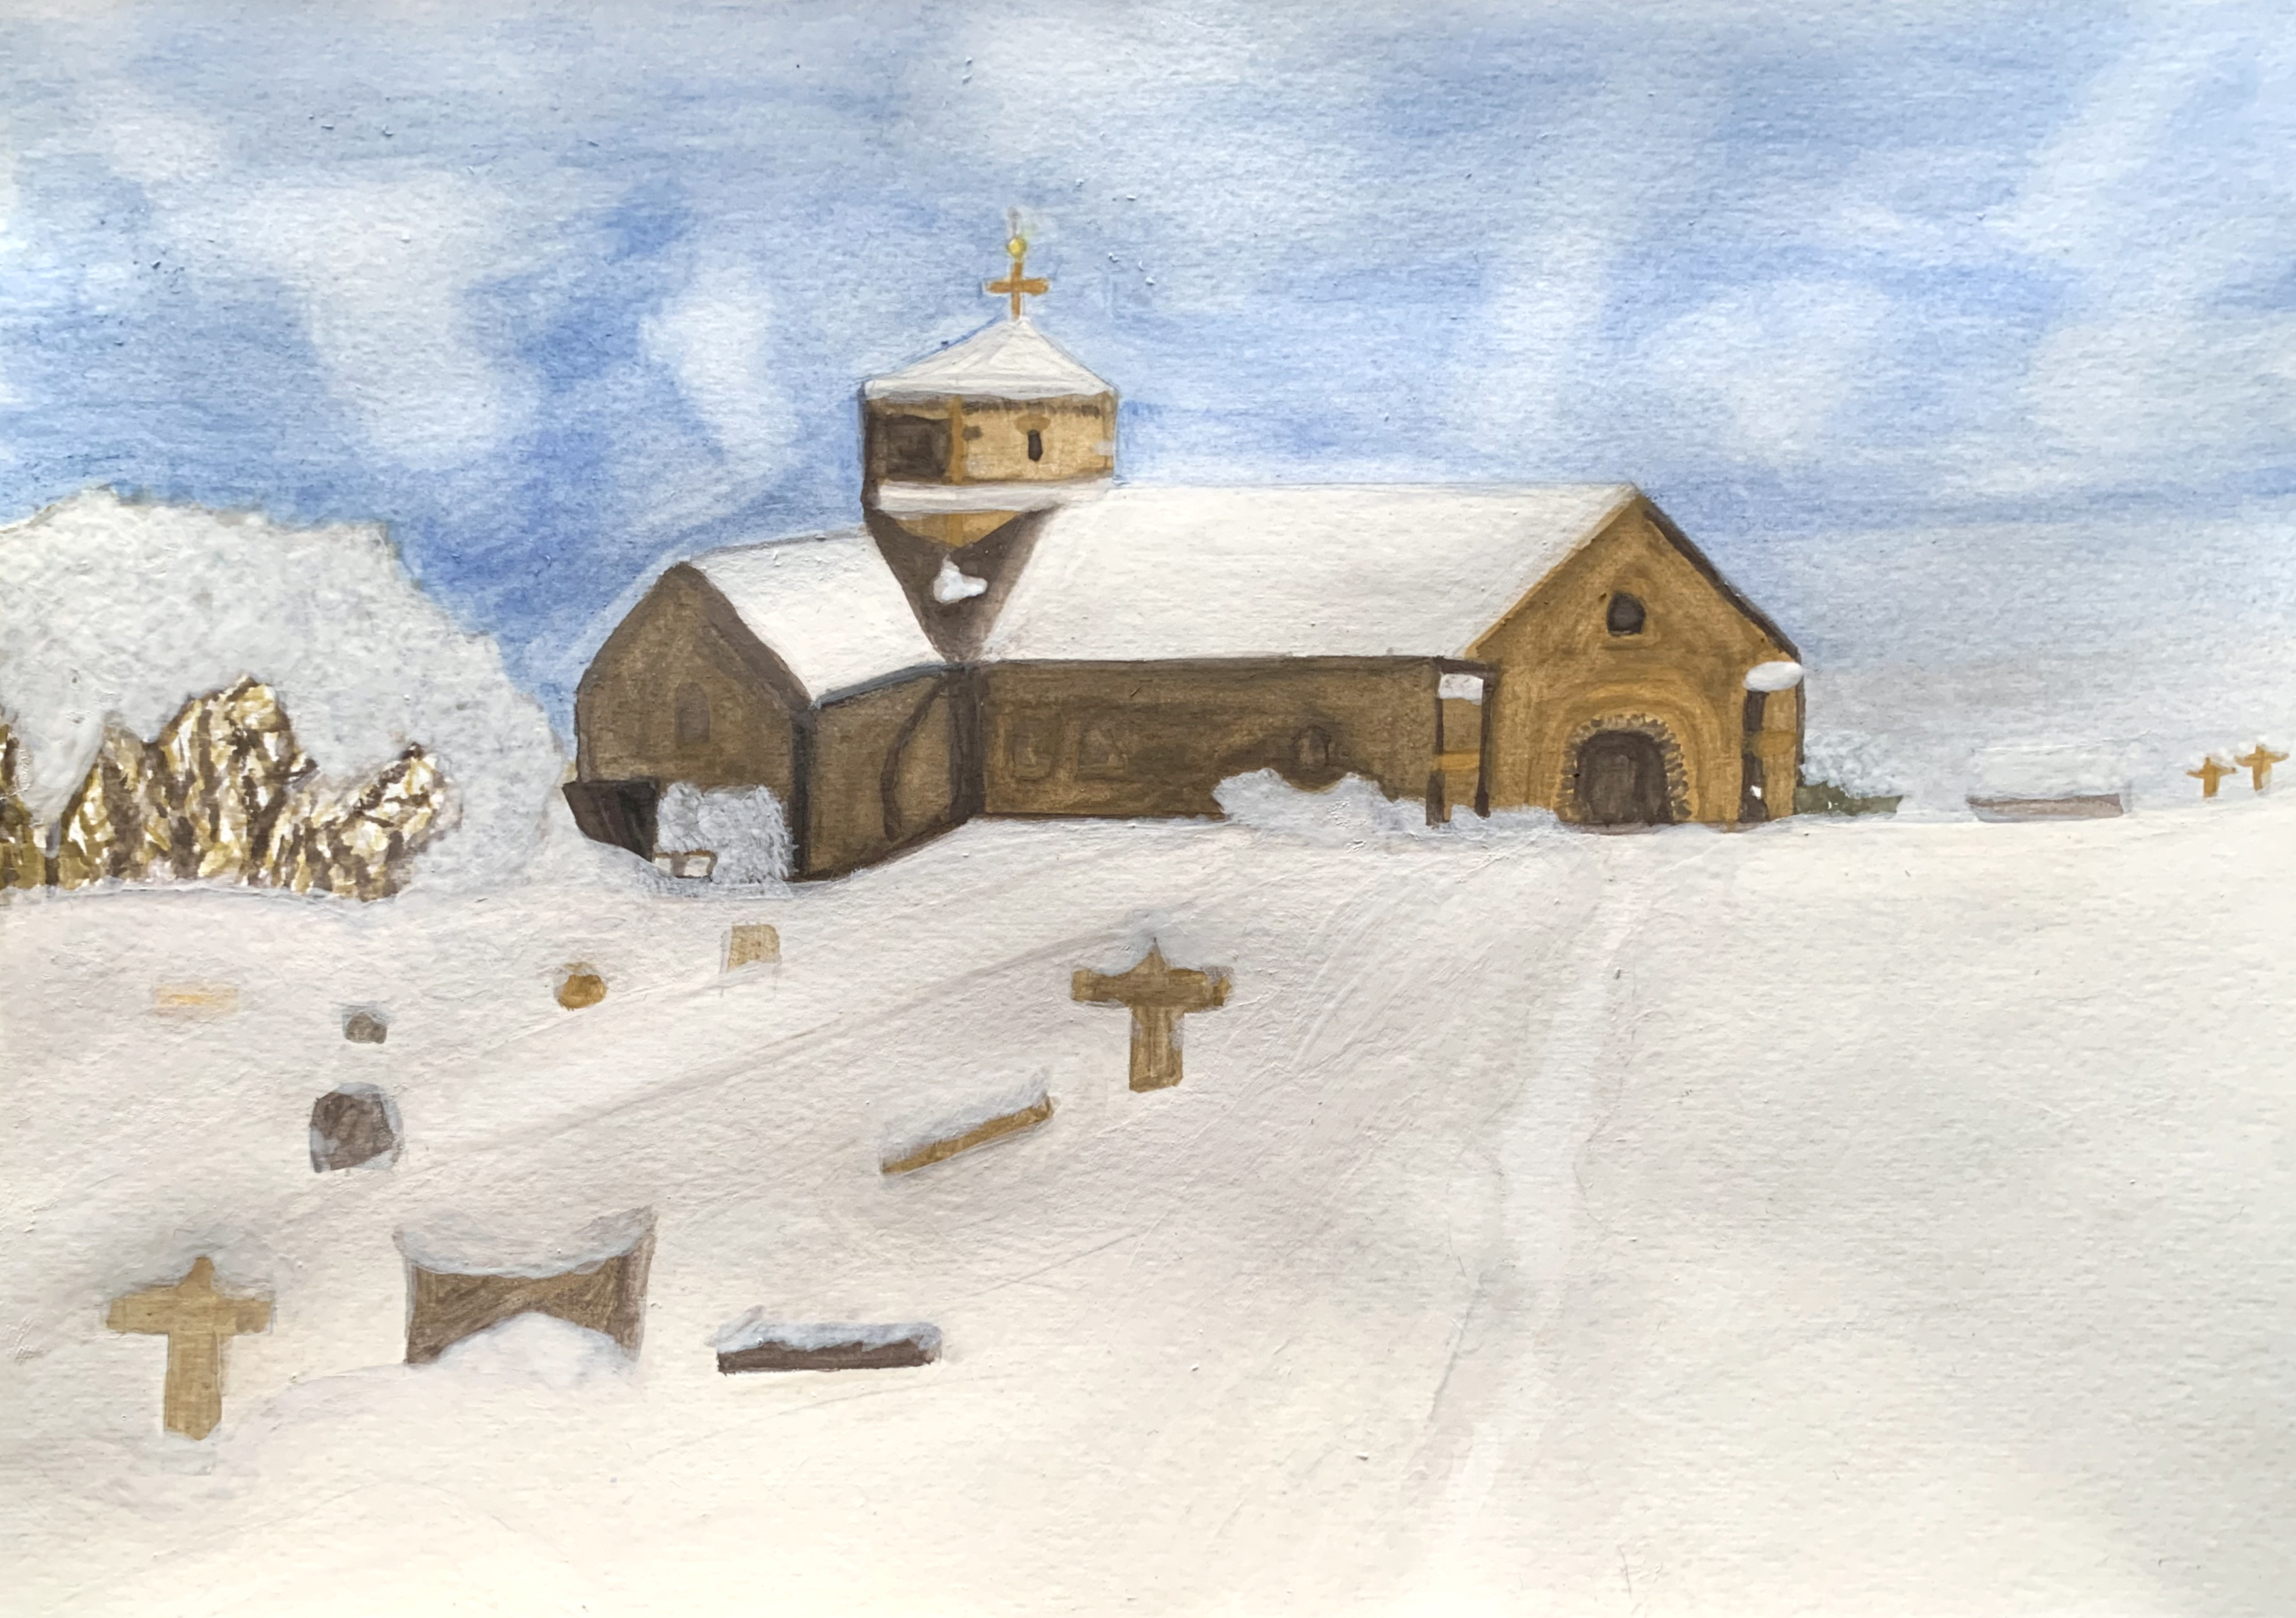 Church in snow scene painting by HMP Send Our Time artist Anouska